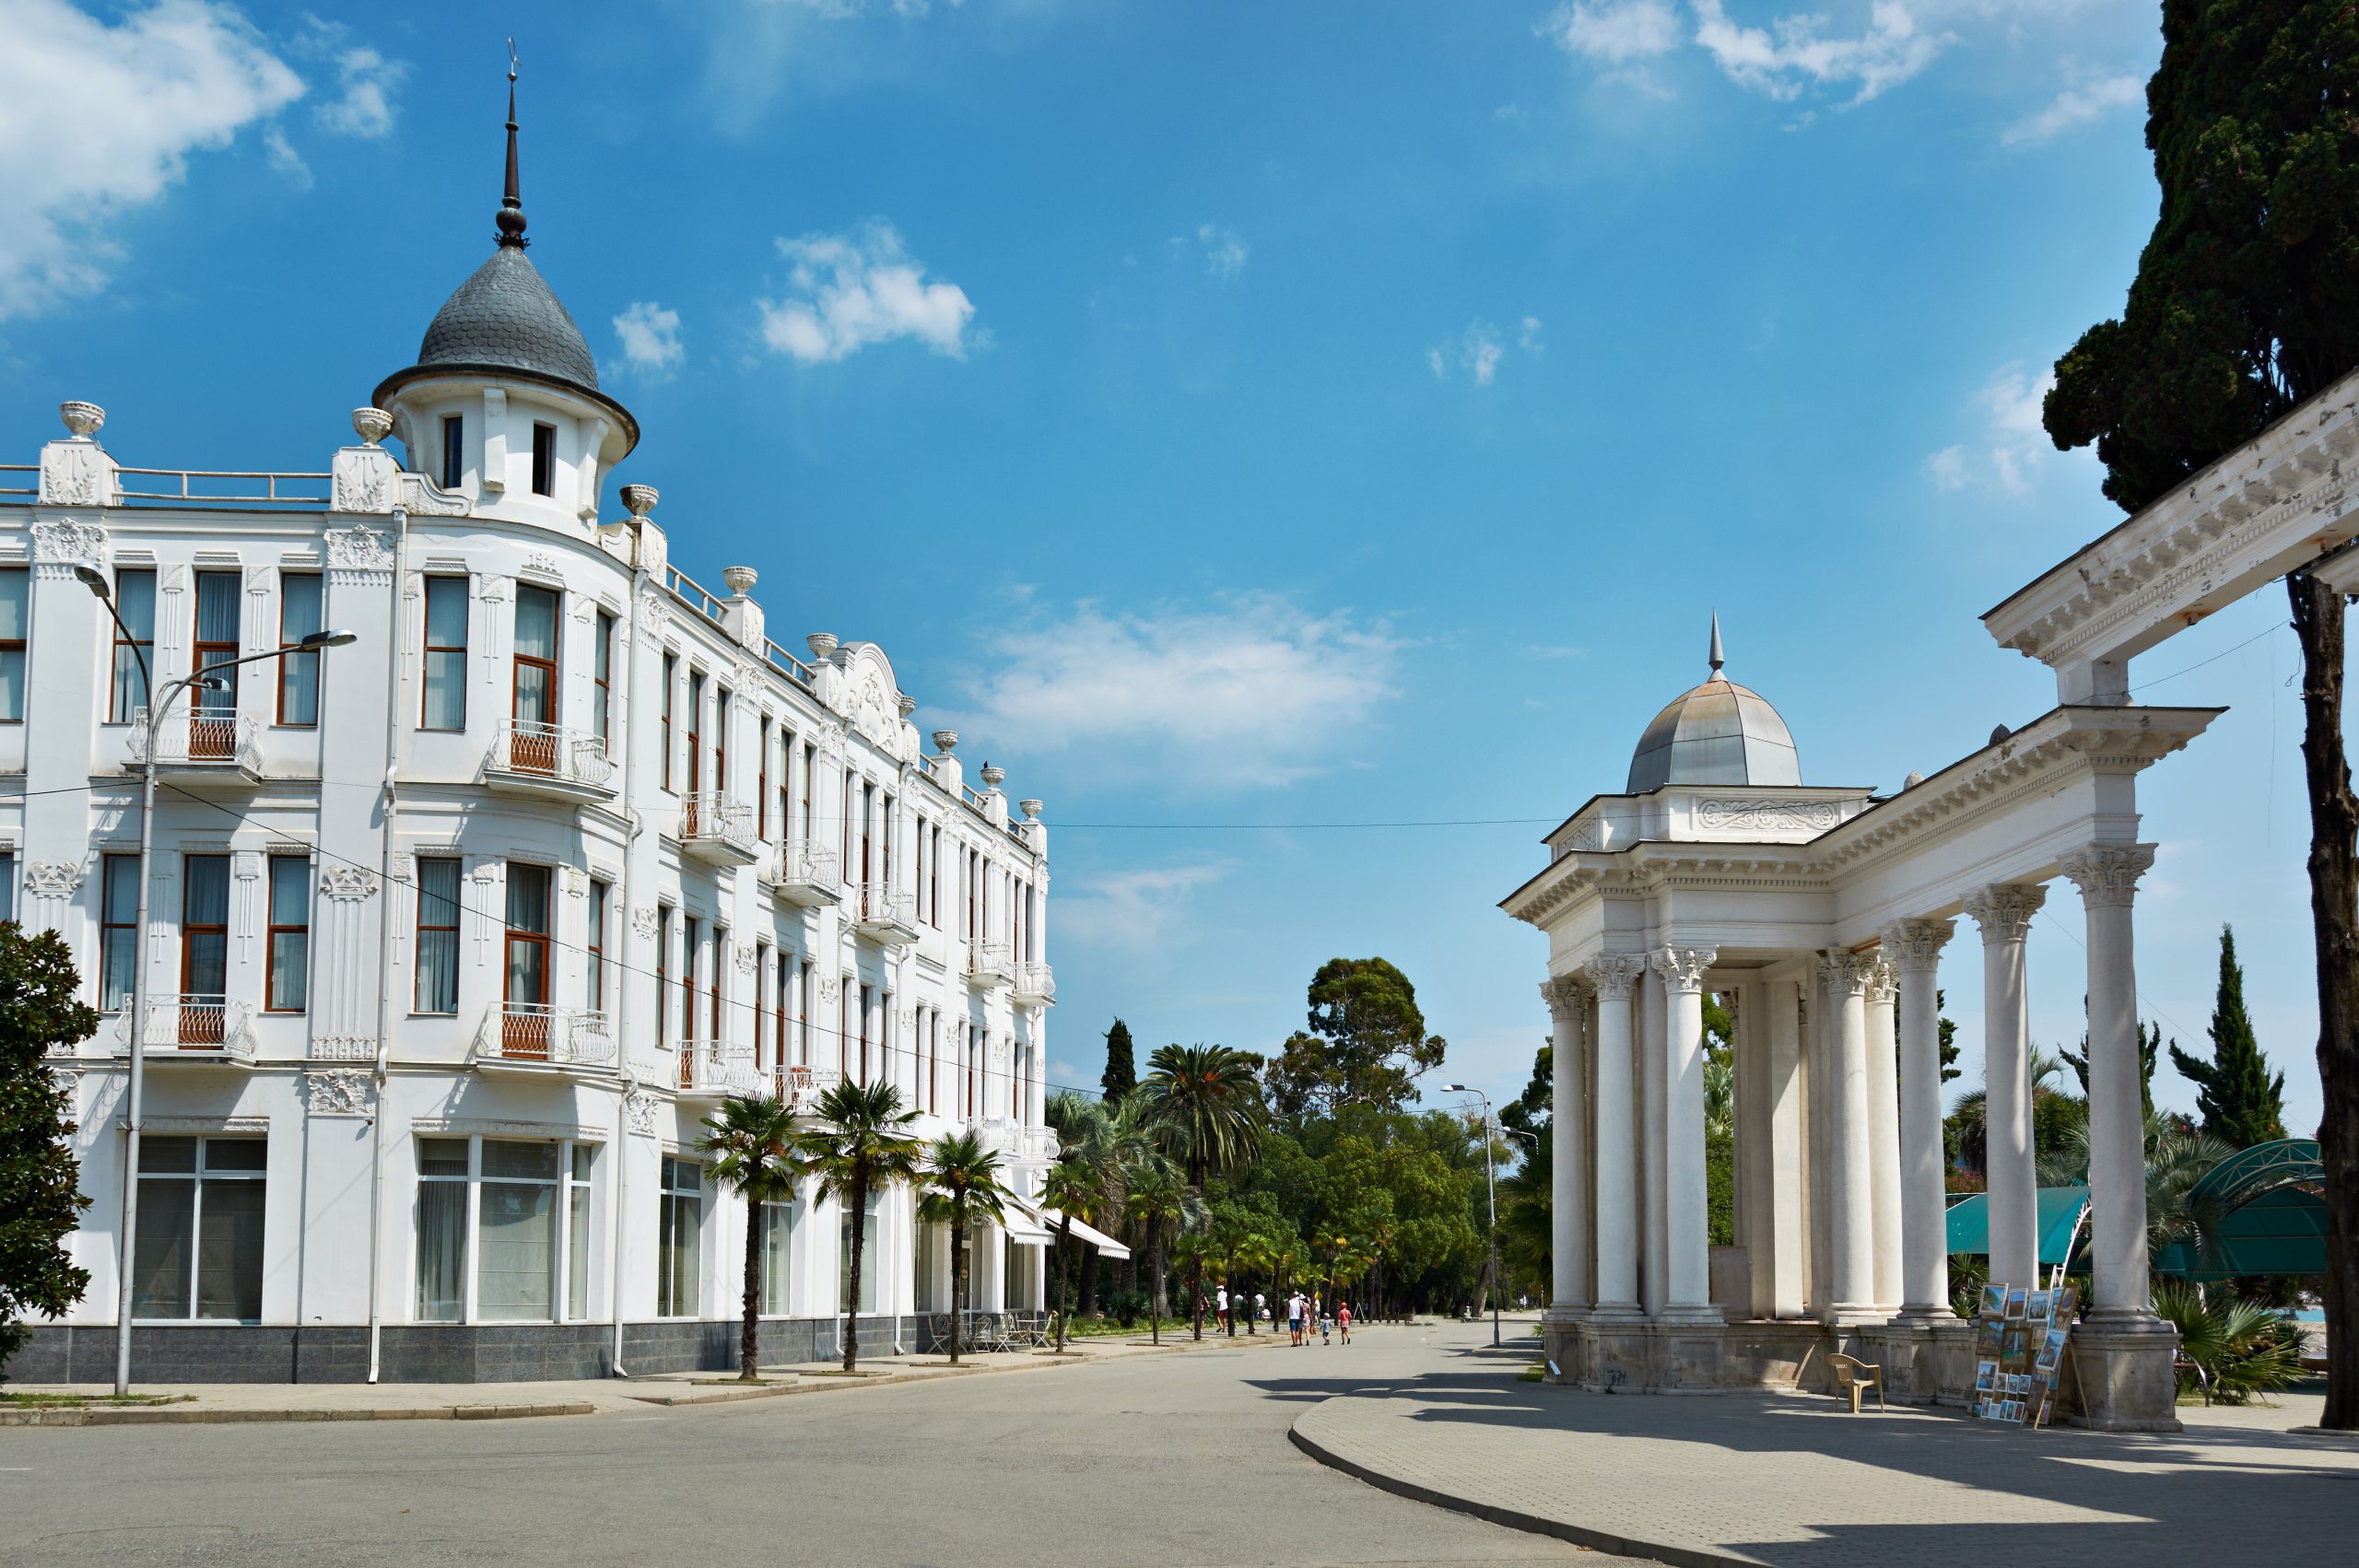 Urban landscape of the city of Sukhumi